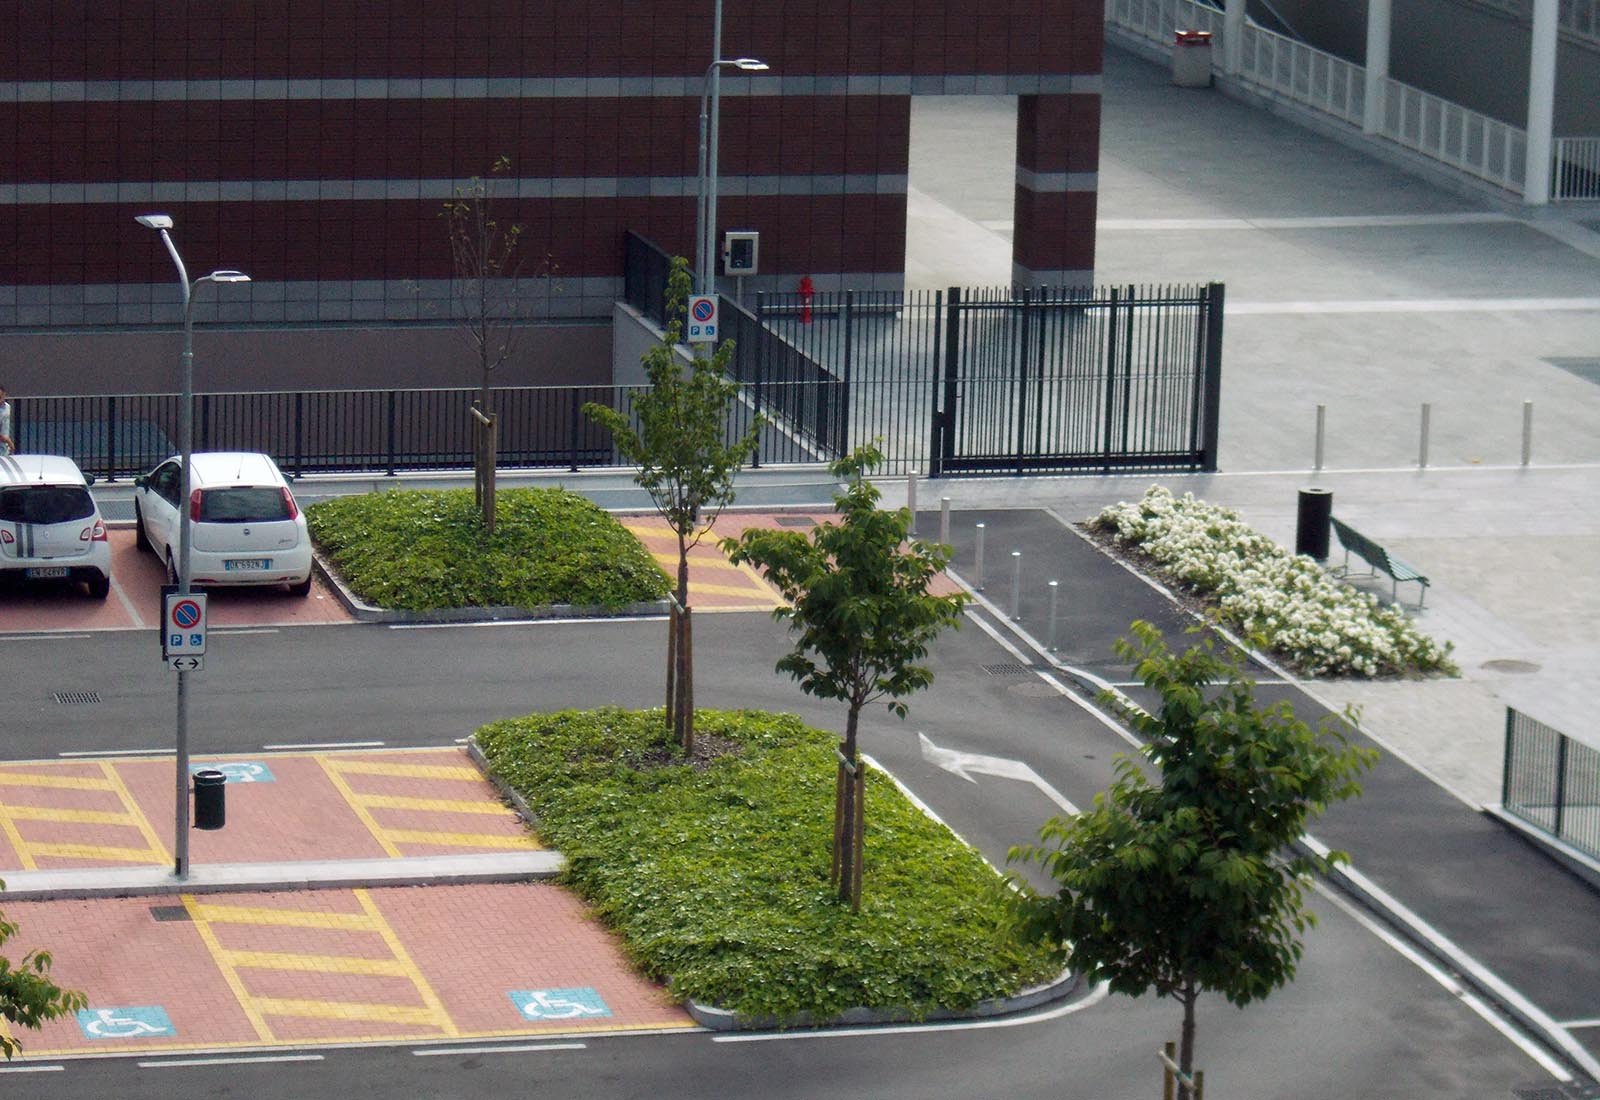 Square and parking lots in Adriano area Milan - Detail of the south parking lot